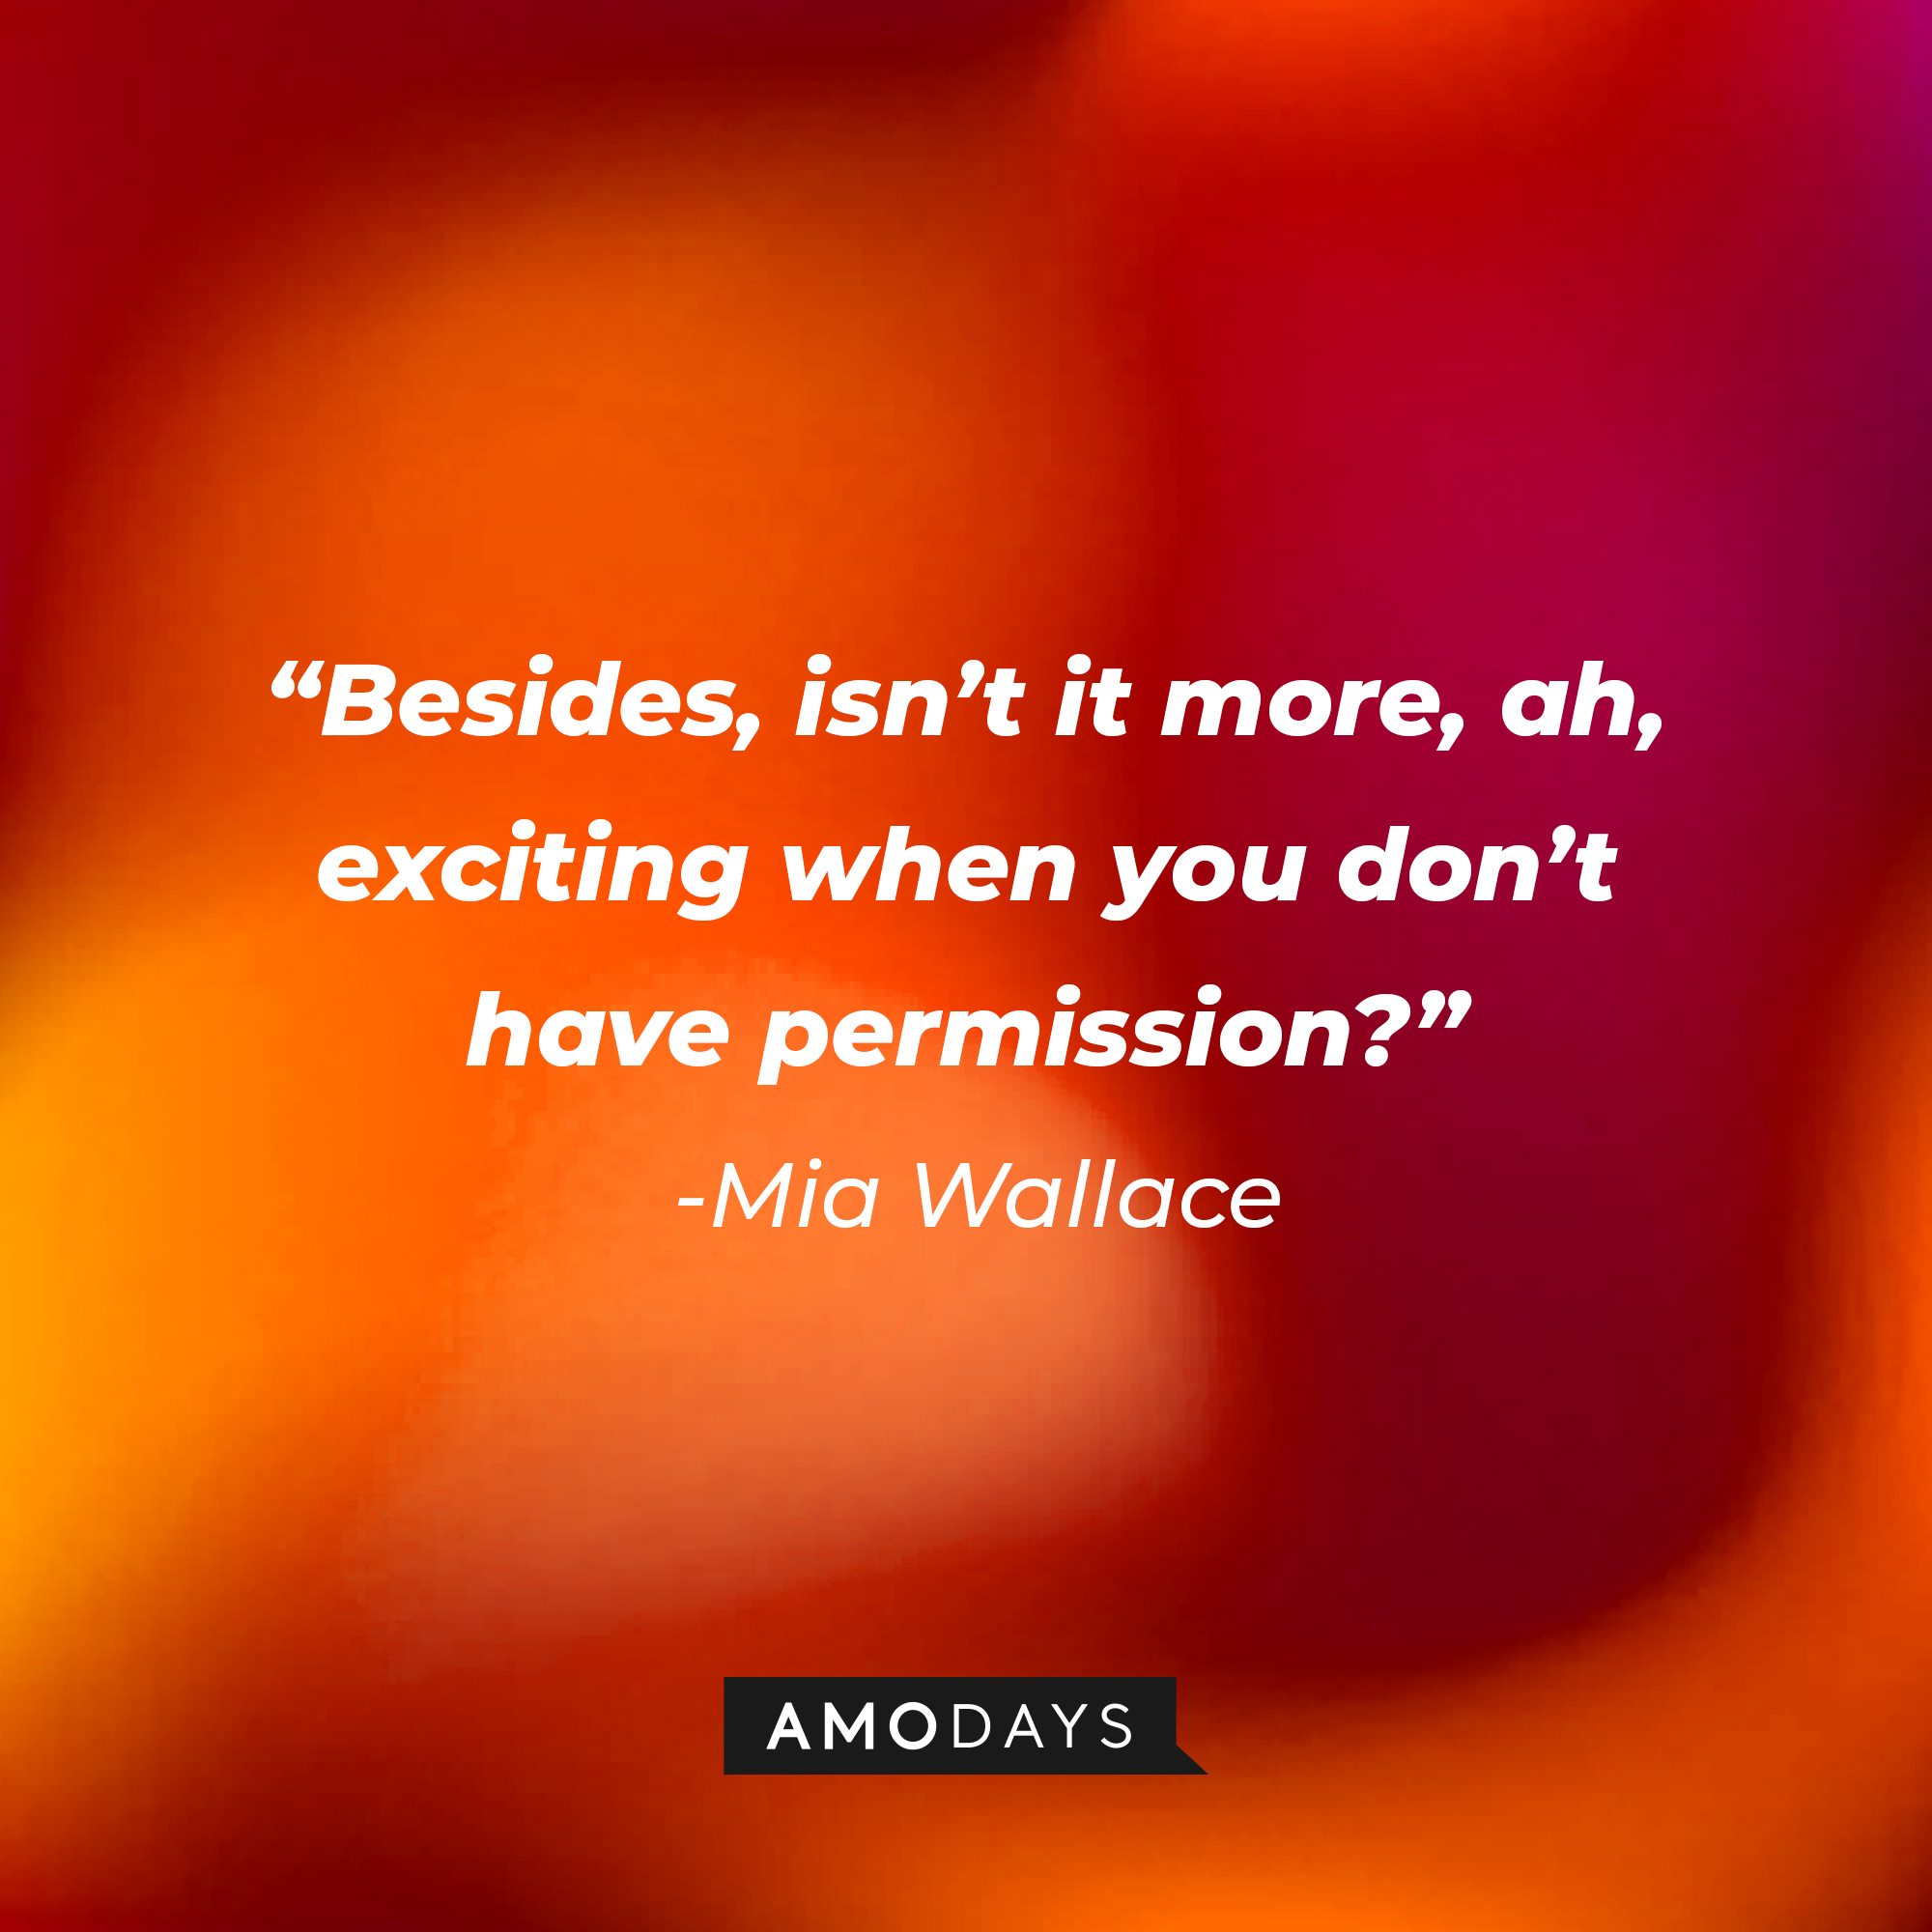 Mia Wallace’s quote: “Besides, isn’t it more, ah, exciting when you don’t have permission?” | Source: AmoDays